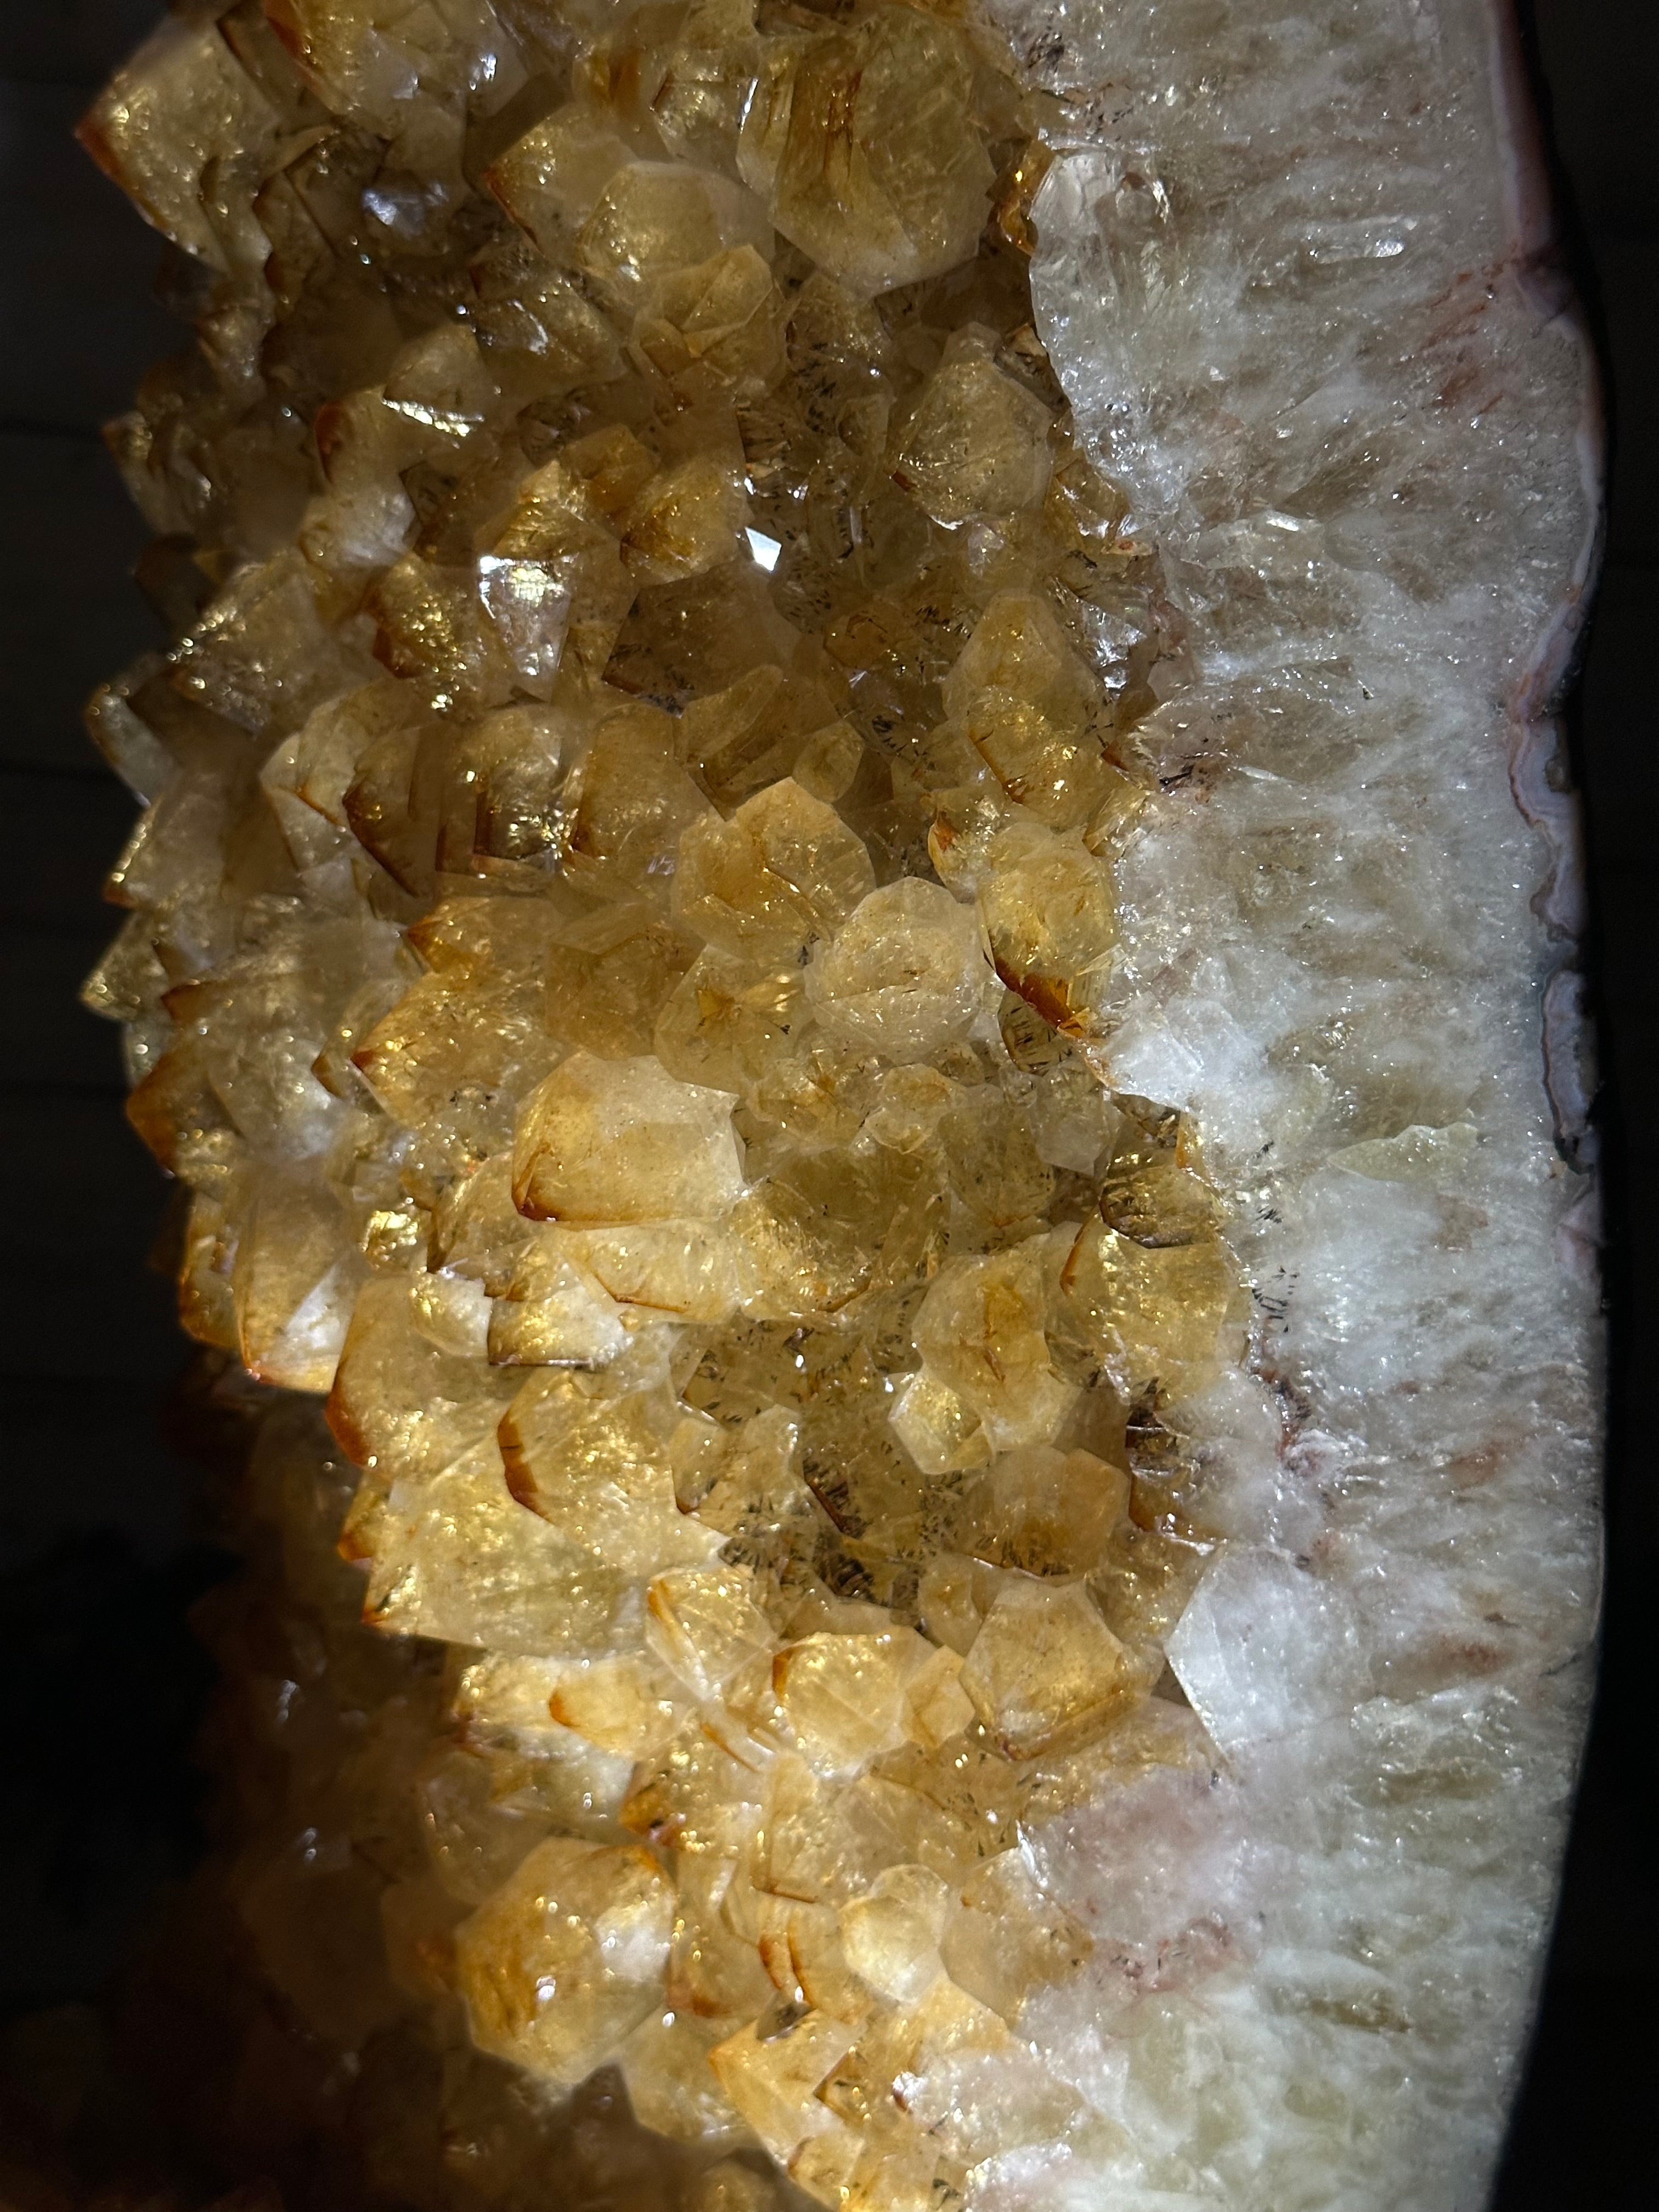 Large Open 2-Sided Brazilian Citrine Cathedral, 264.6 lbs & 64.3" tall #5608-0028 - Brazil GemsBrazil GemsLarge Open 2-Sided Brazilian Citrine Cathedral, 264.6 lbs & 64.3" tall #5608-0028Open 2-Sided Cathedrals5608-0028